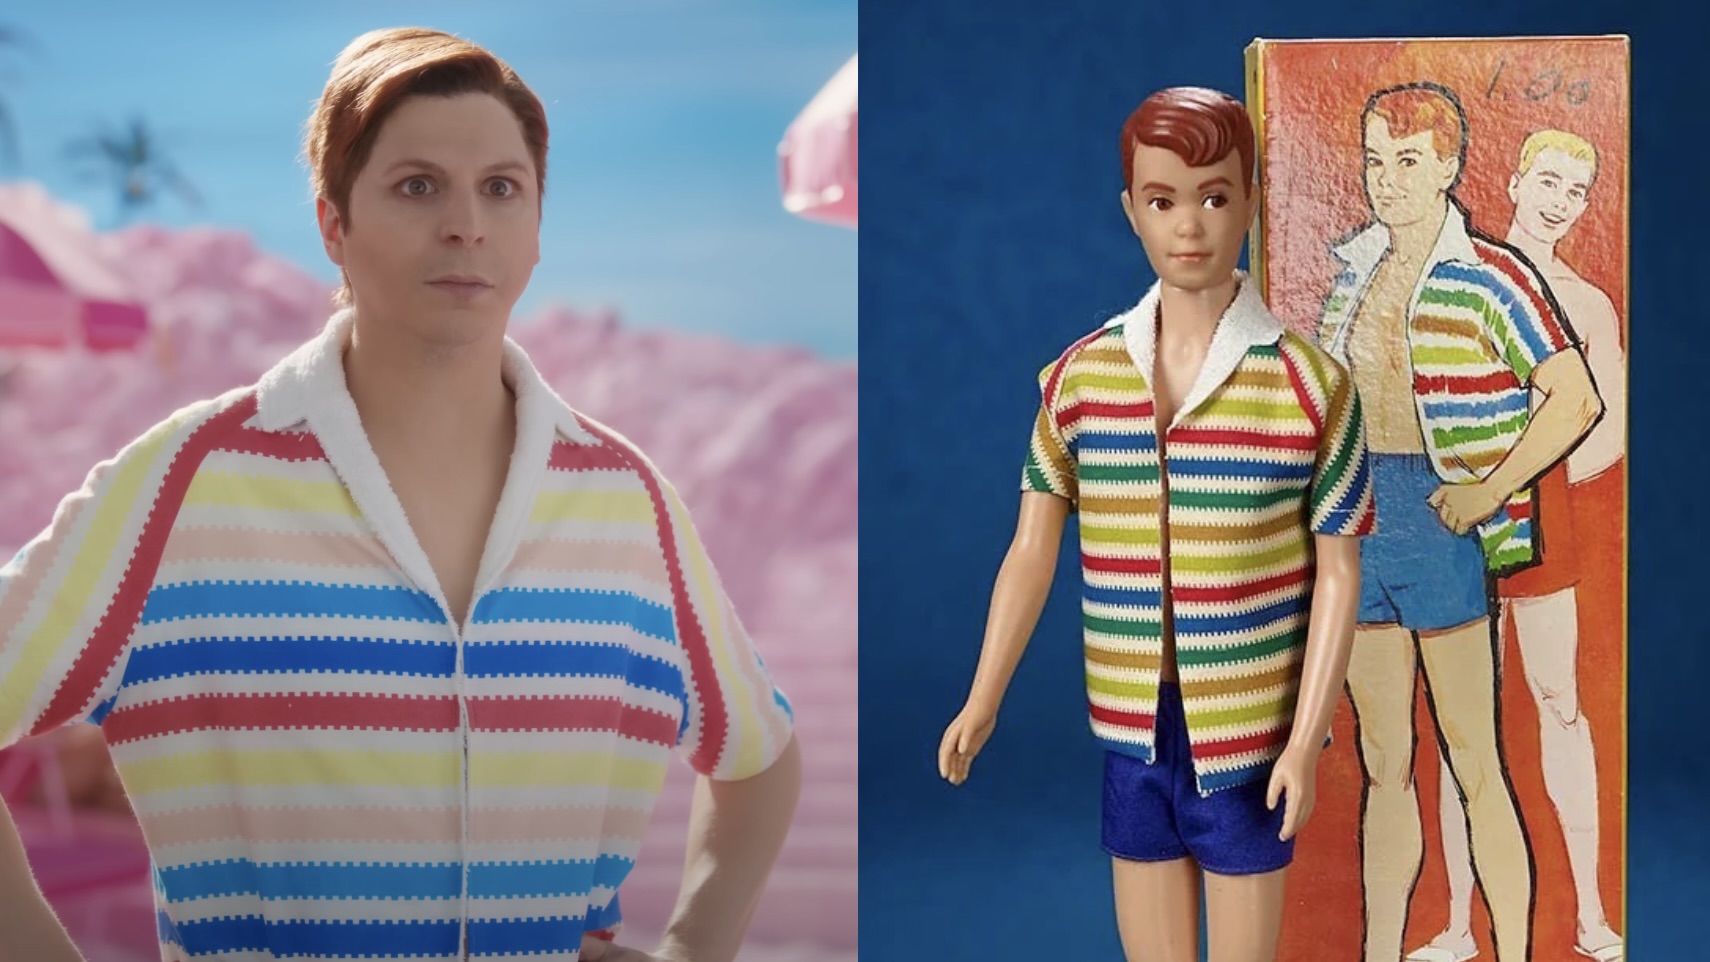 Looking to Buy Ken Dolls This Year. : 8 Ways to Find the Best Prices